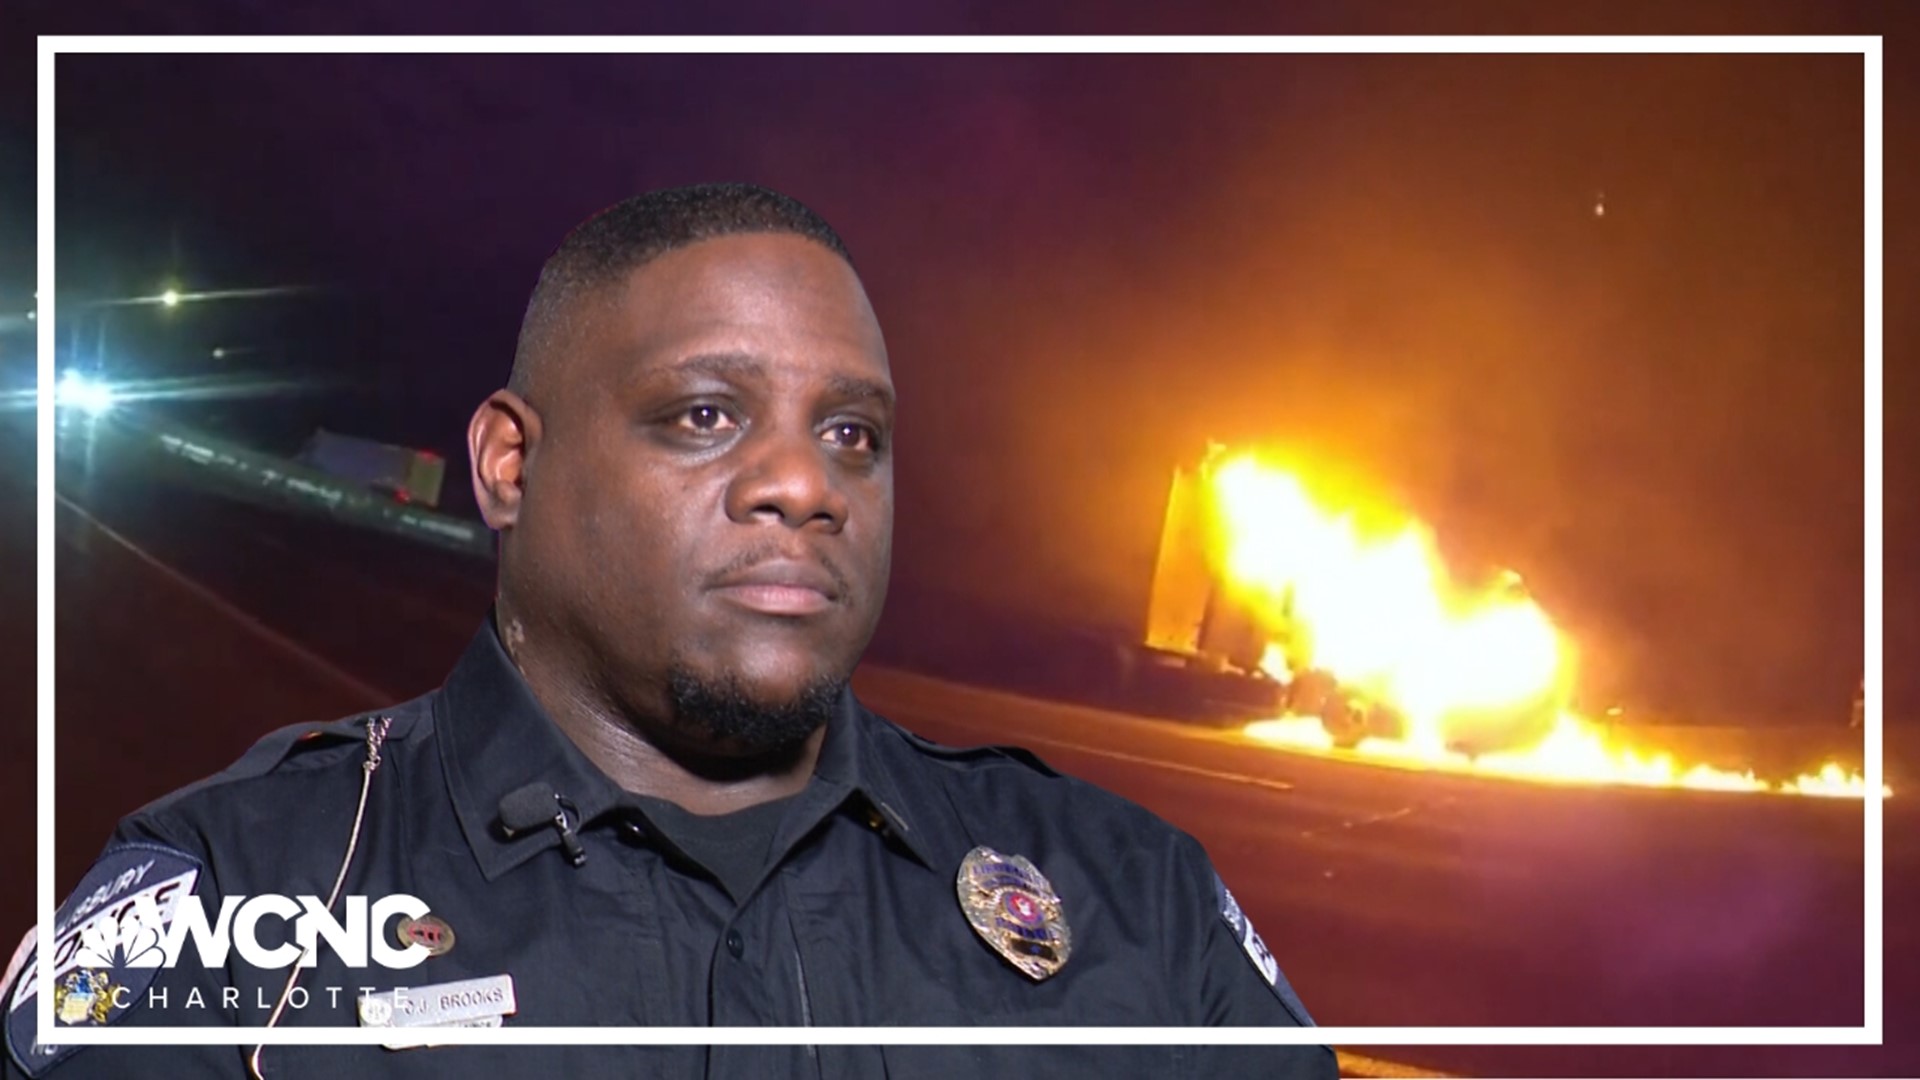 Lt. Corey Brooks pulled a man from a burning truck despite the danger to himself.